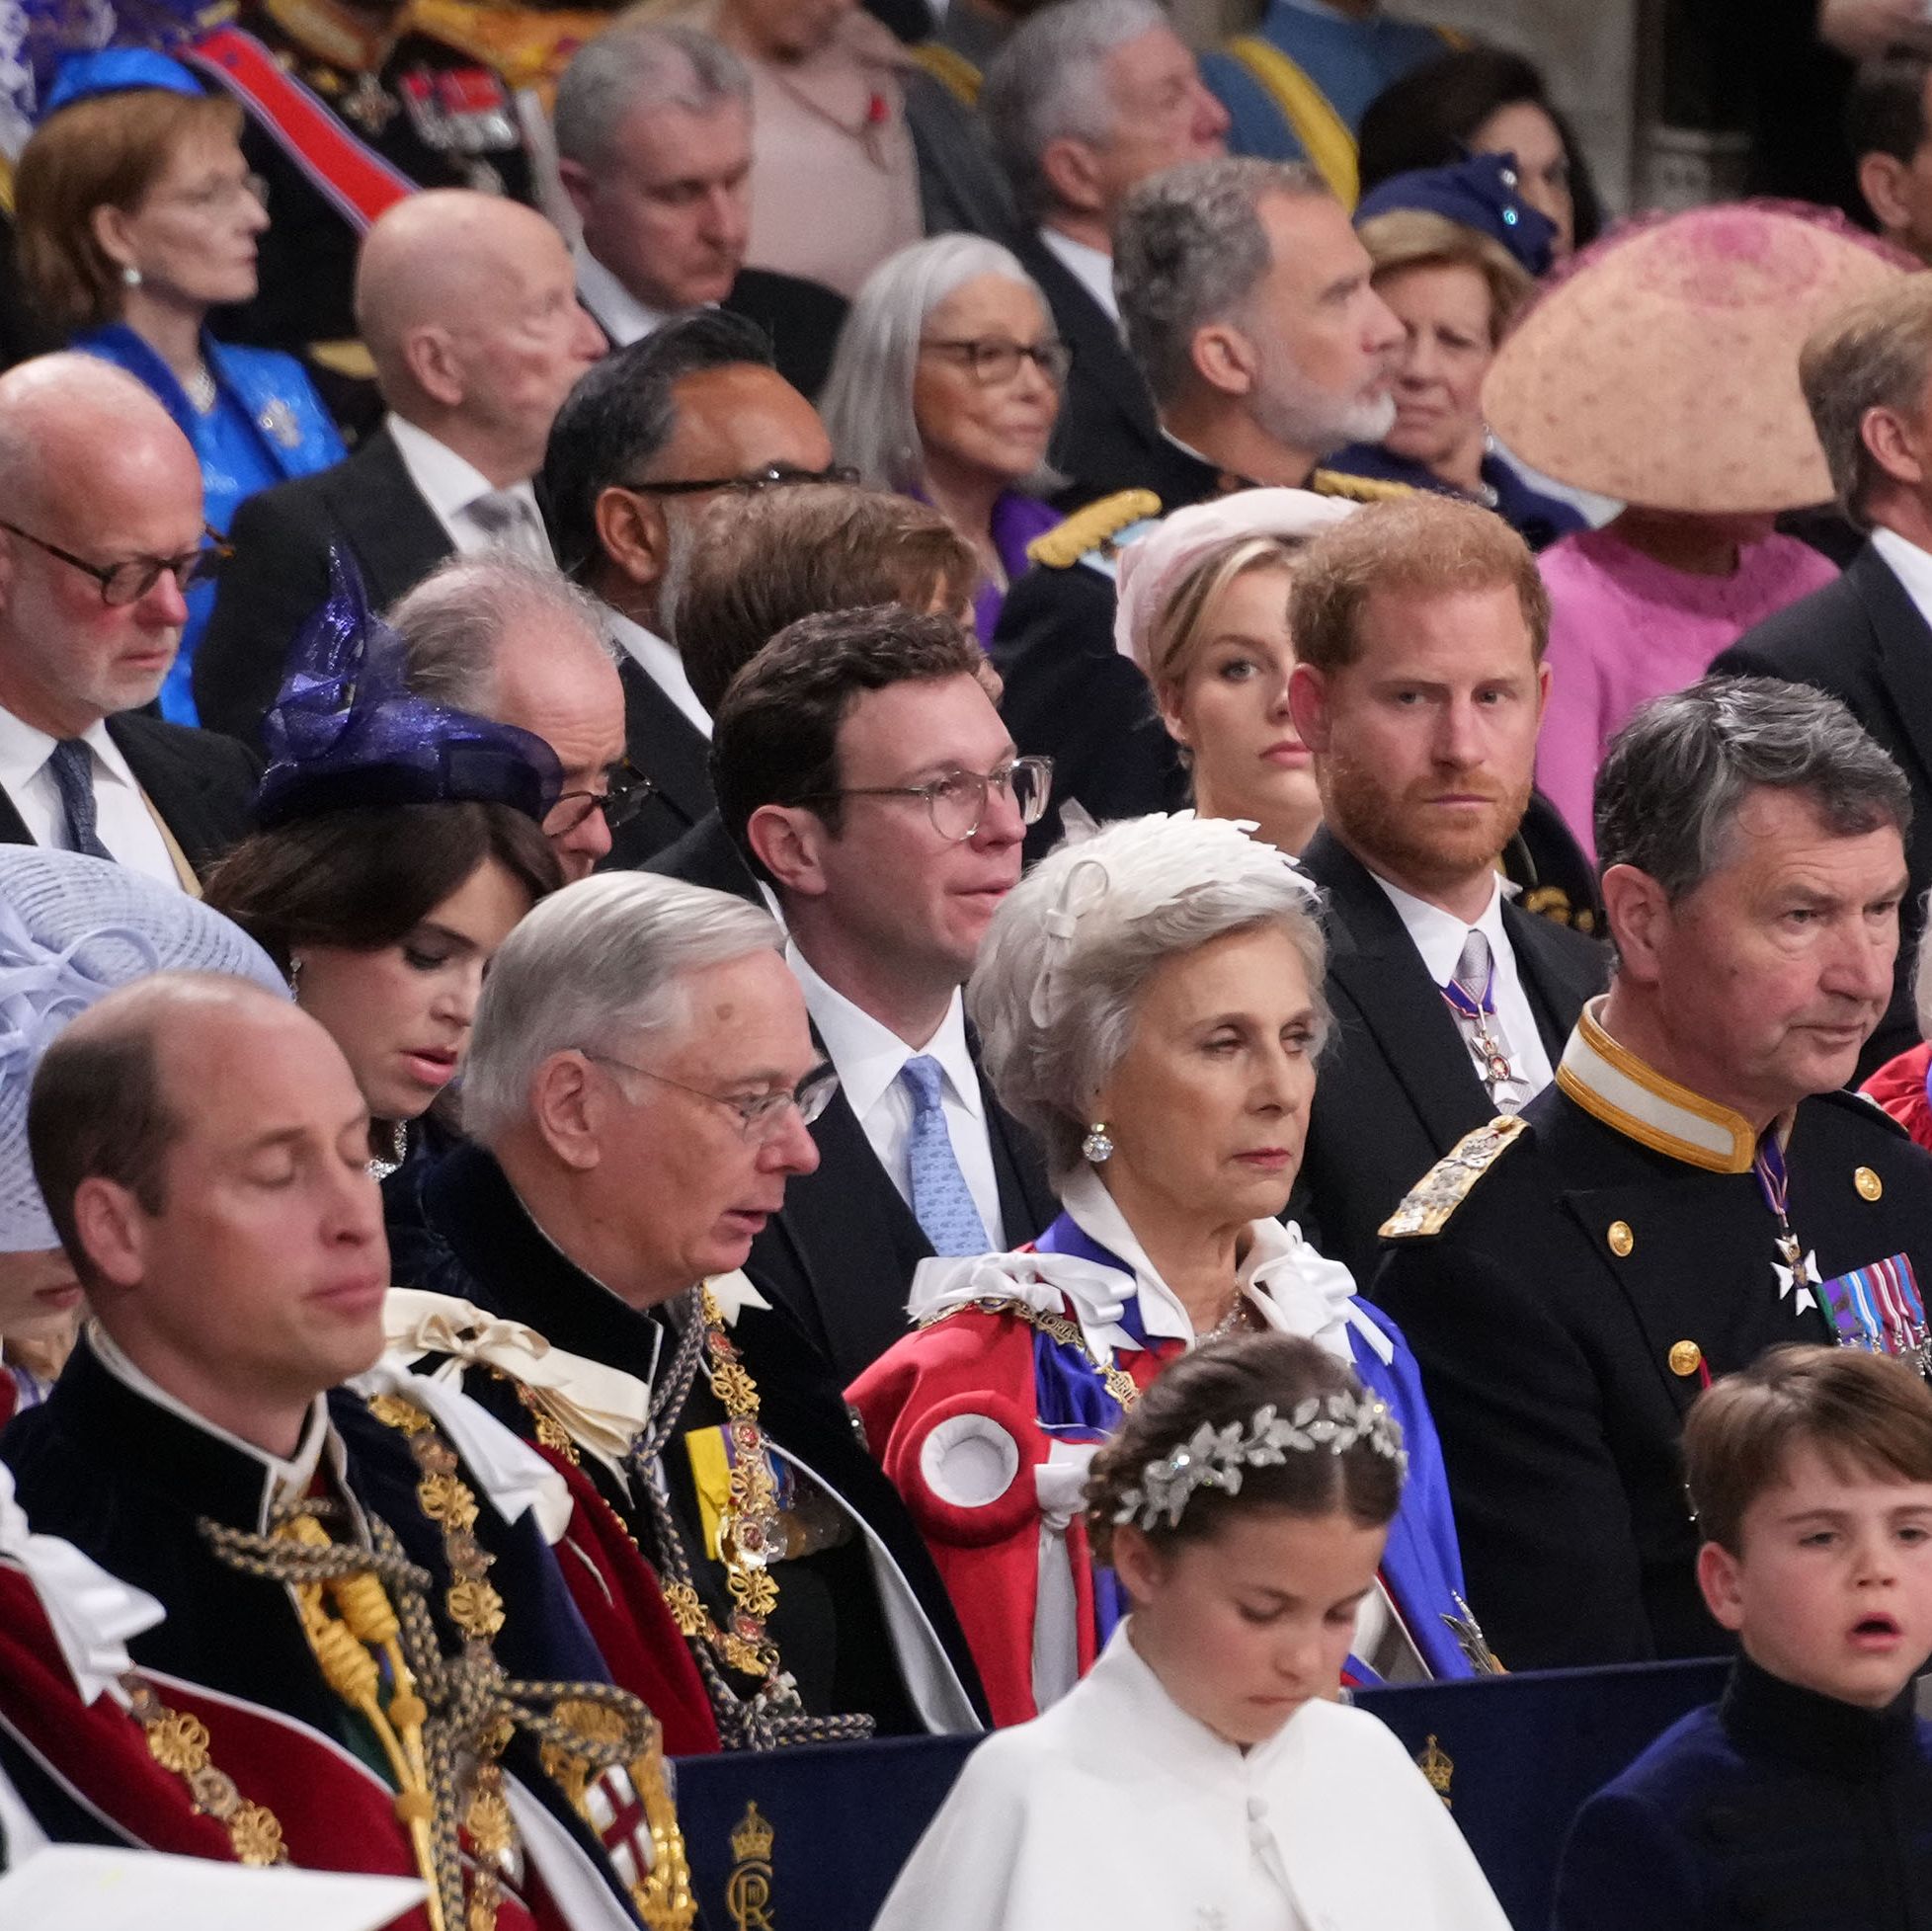 Prince Harry's Body Language at the Coronation Showed 